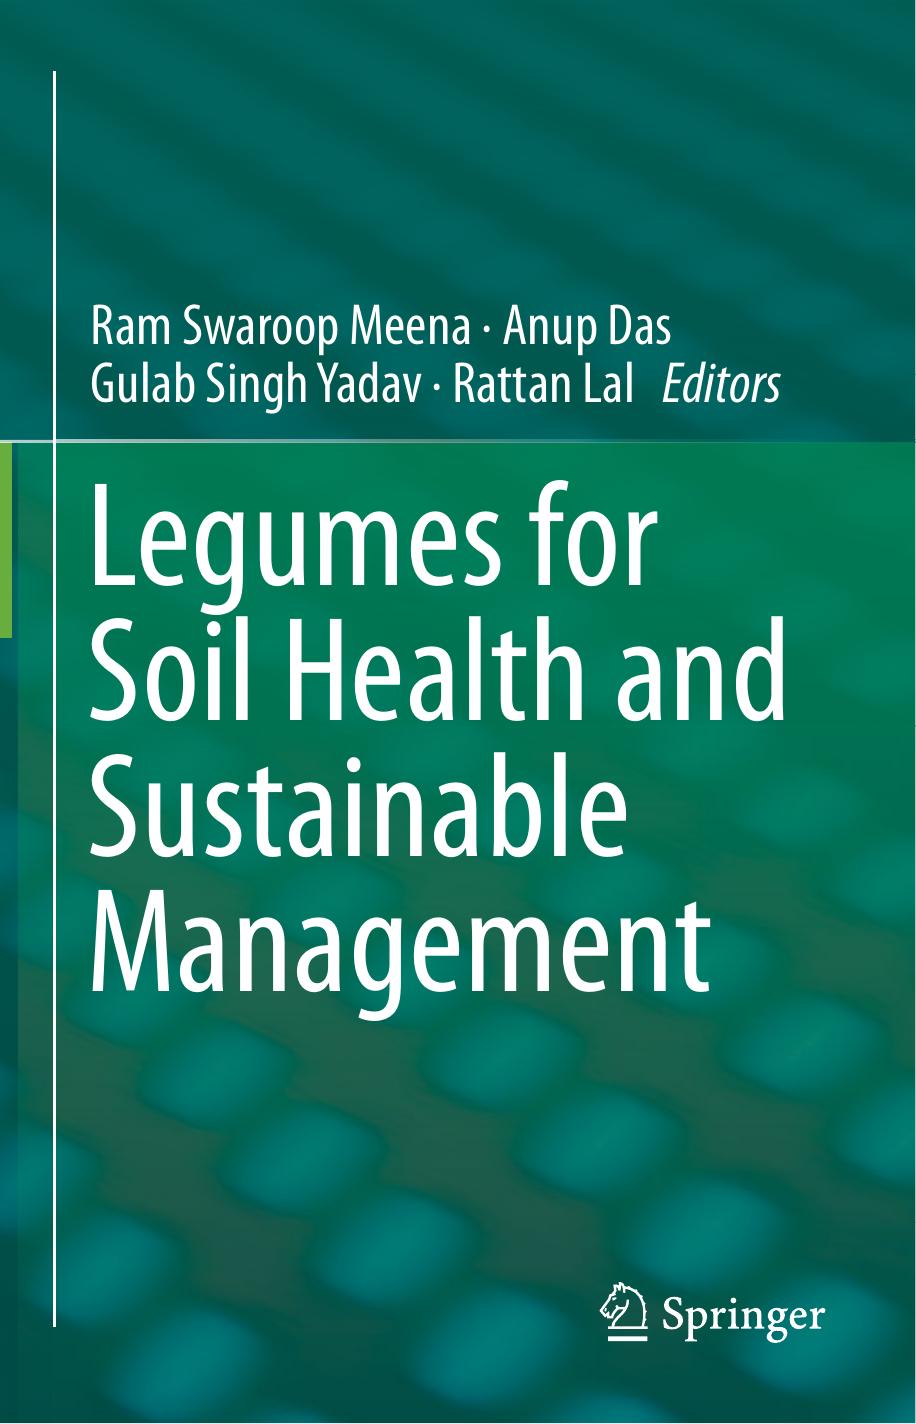 Legumes for Soil Health and Sustainable Management 2018